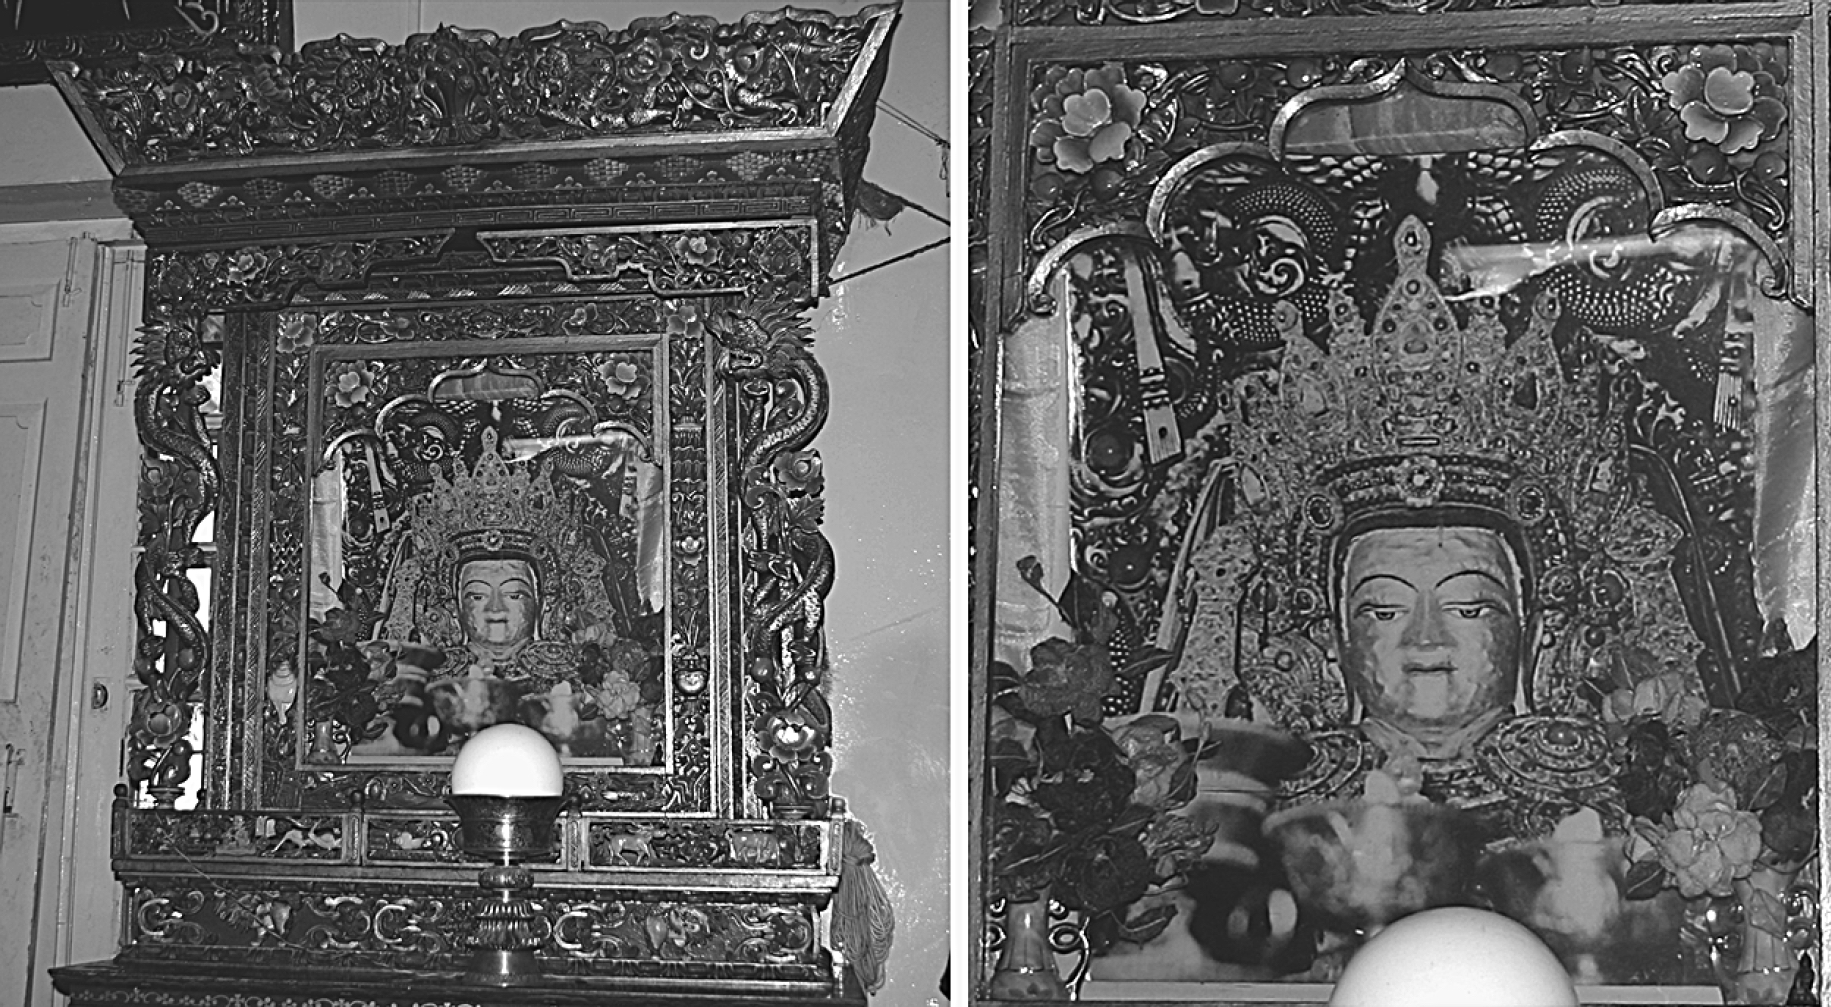 Side-by-side photographs in medium and close view of elaborate cabinet containing crowned bust of Buddha